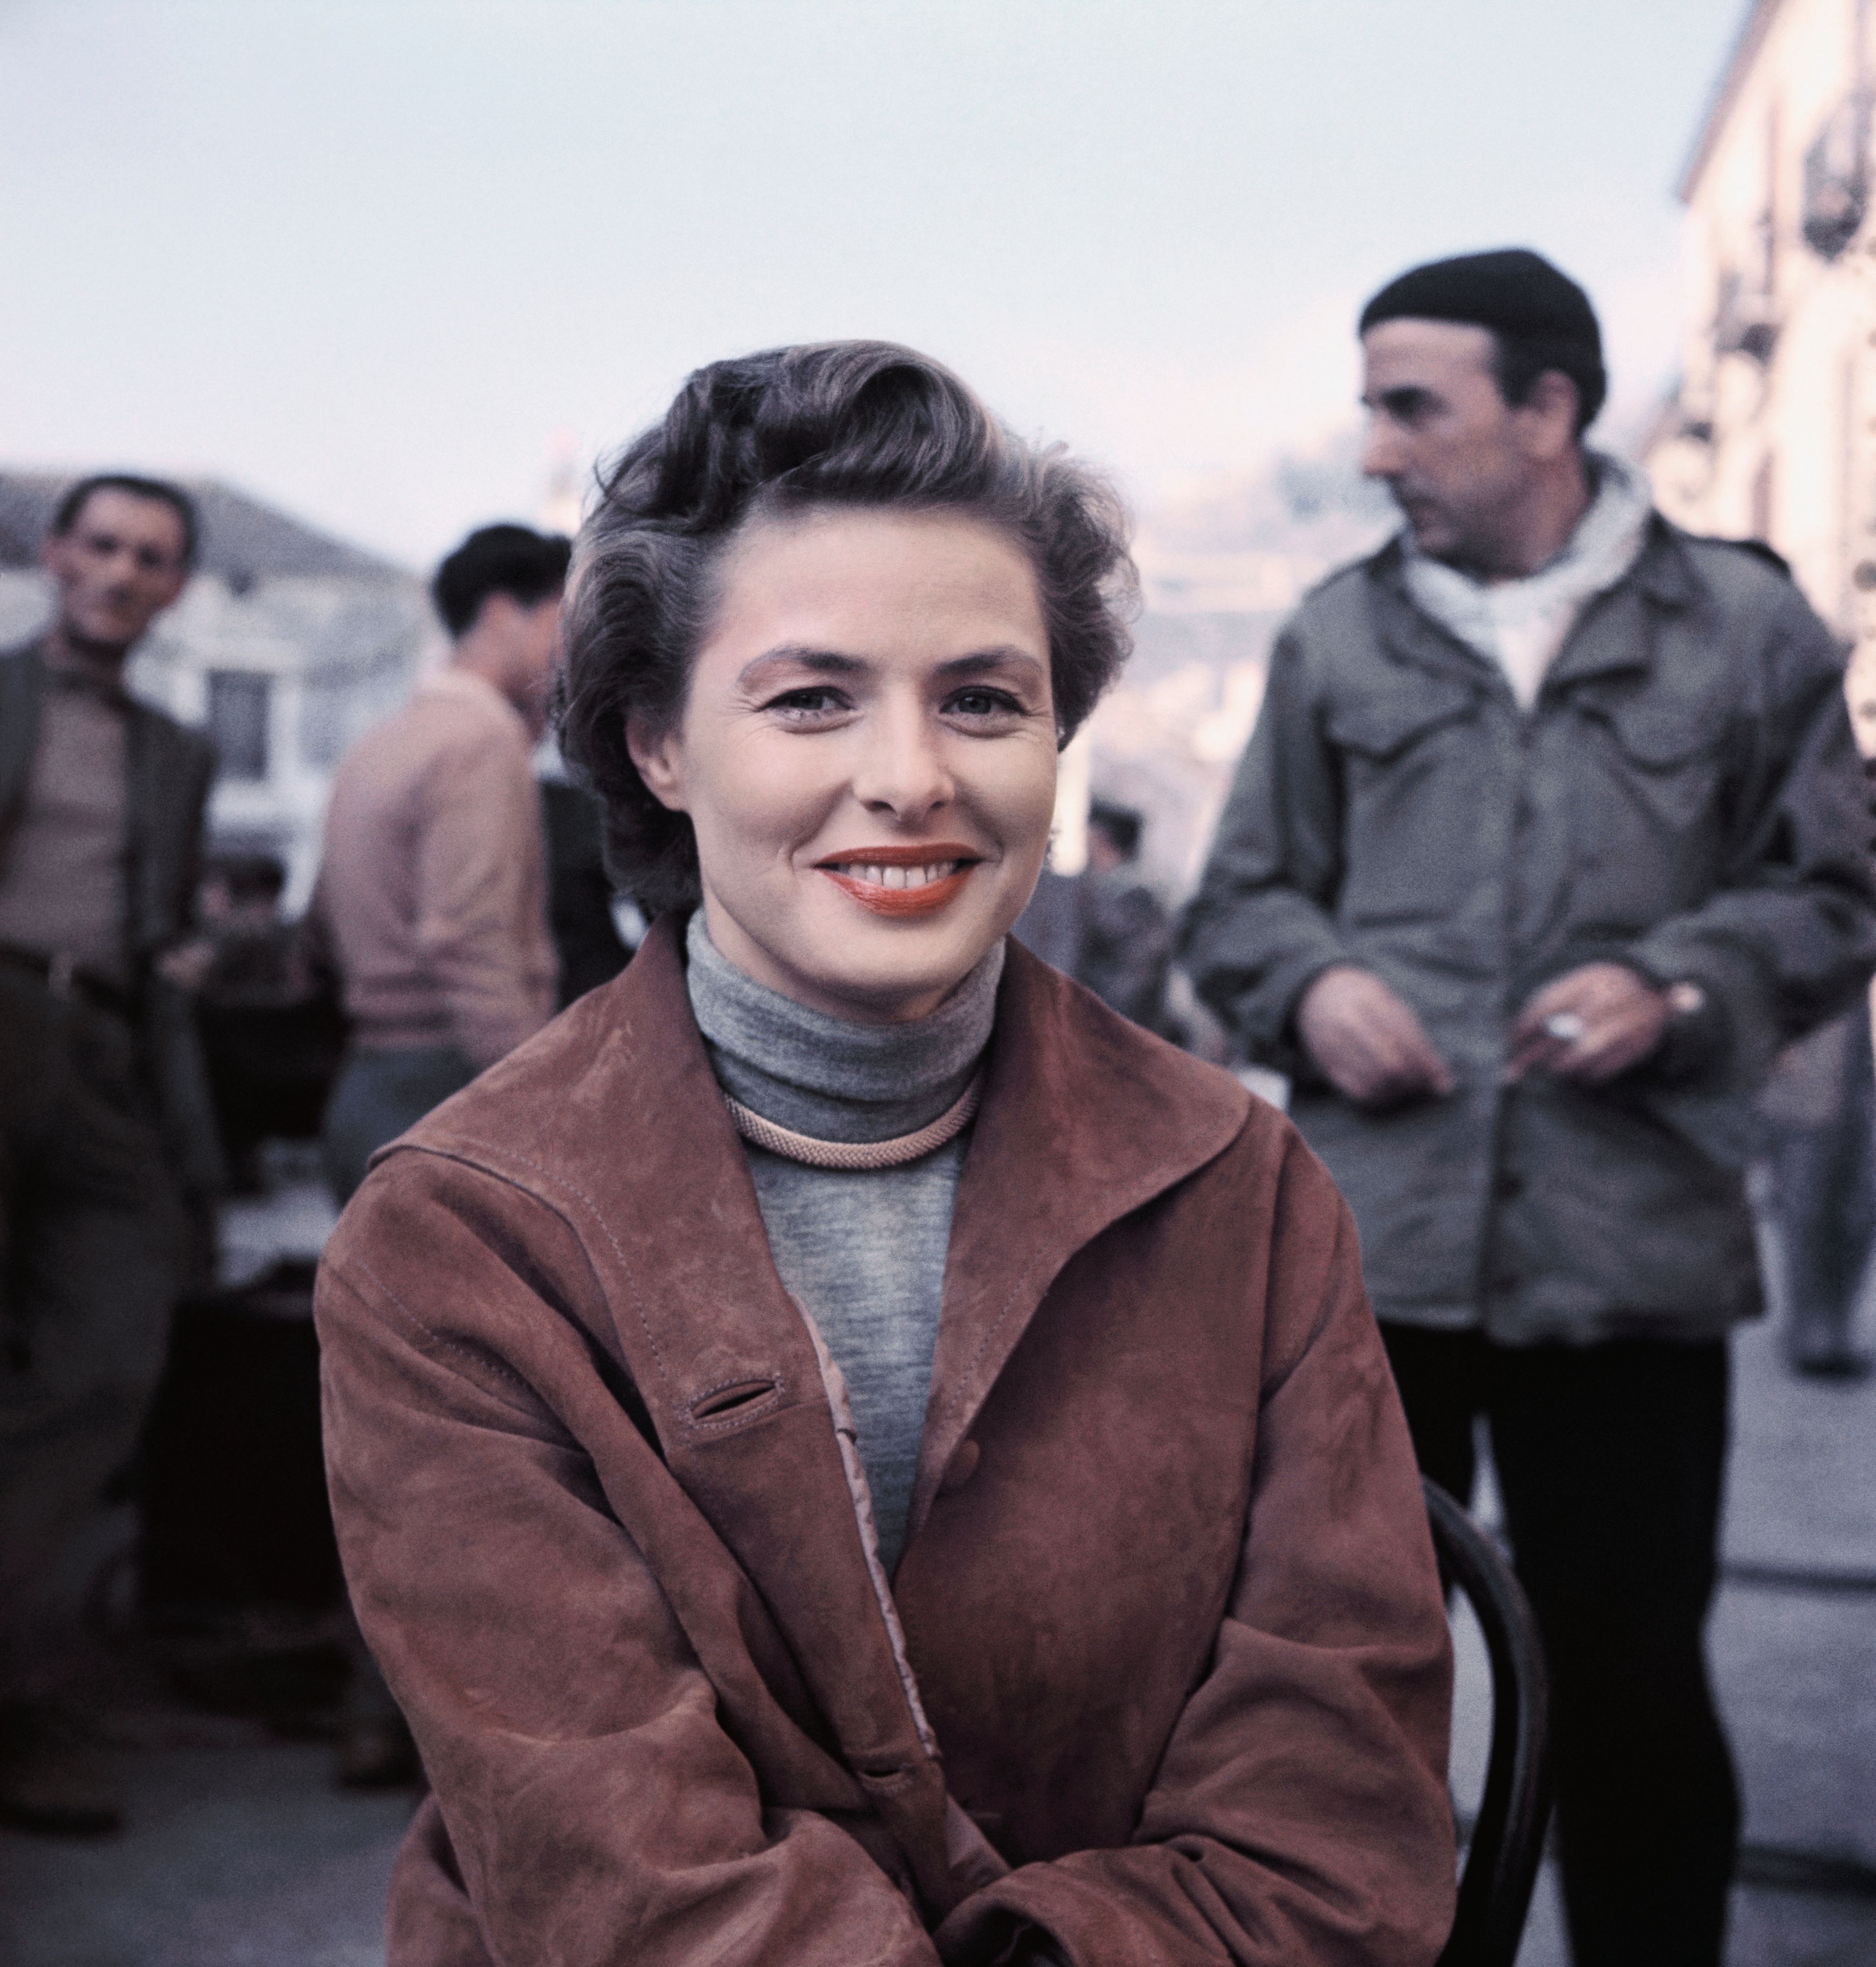 Ingrid Bergman on the set of "Journey to Italy" directed by her husband, Roberto Rossellini, in 1954 | Source: Getty Images